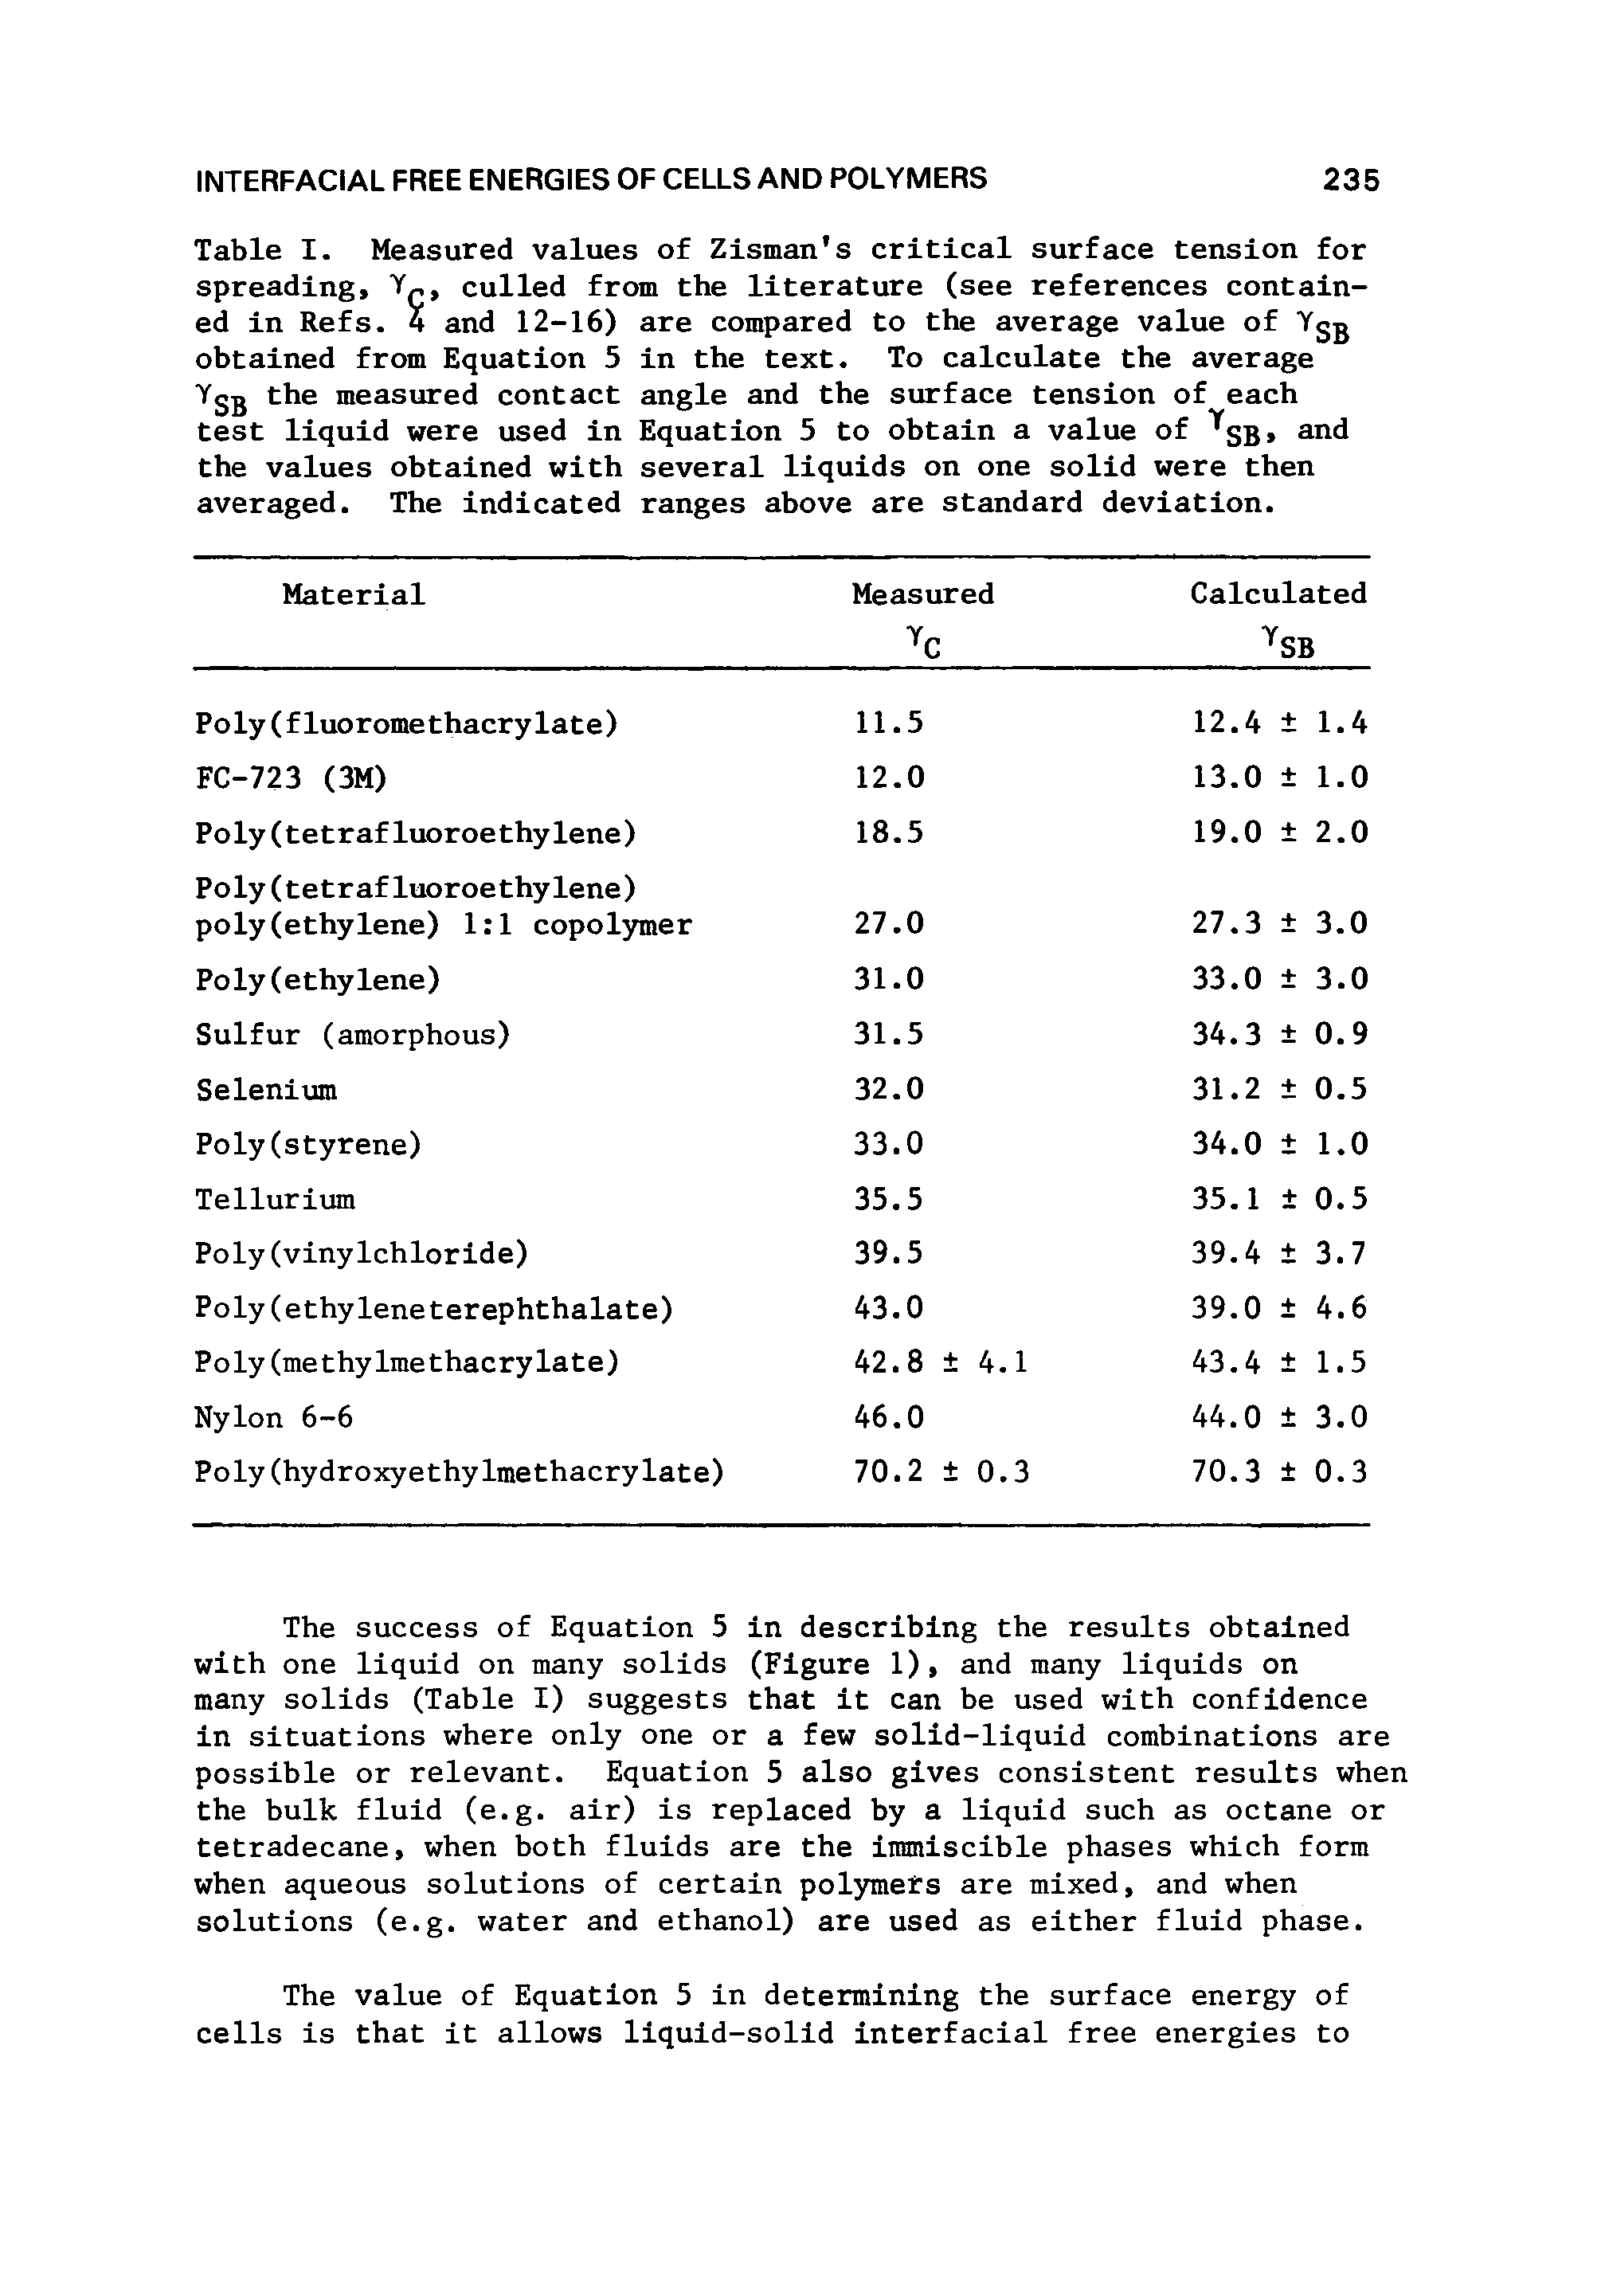 Table I. Measured values of Zisman s critical surface tension for spreading, Y , culled from the literature (see references contained in Refs. 4 and 12-16) are compared to the average value of Ygg obtained from Equation 5 in the text. To calculate the average Ysb the measured contact angle and the surface tension of each test liquid were used in Equation 5 to obtain a value of SB the values obtained with several liquids on one solid were then averaged. The indicated ranges above are standard deviation.